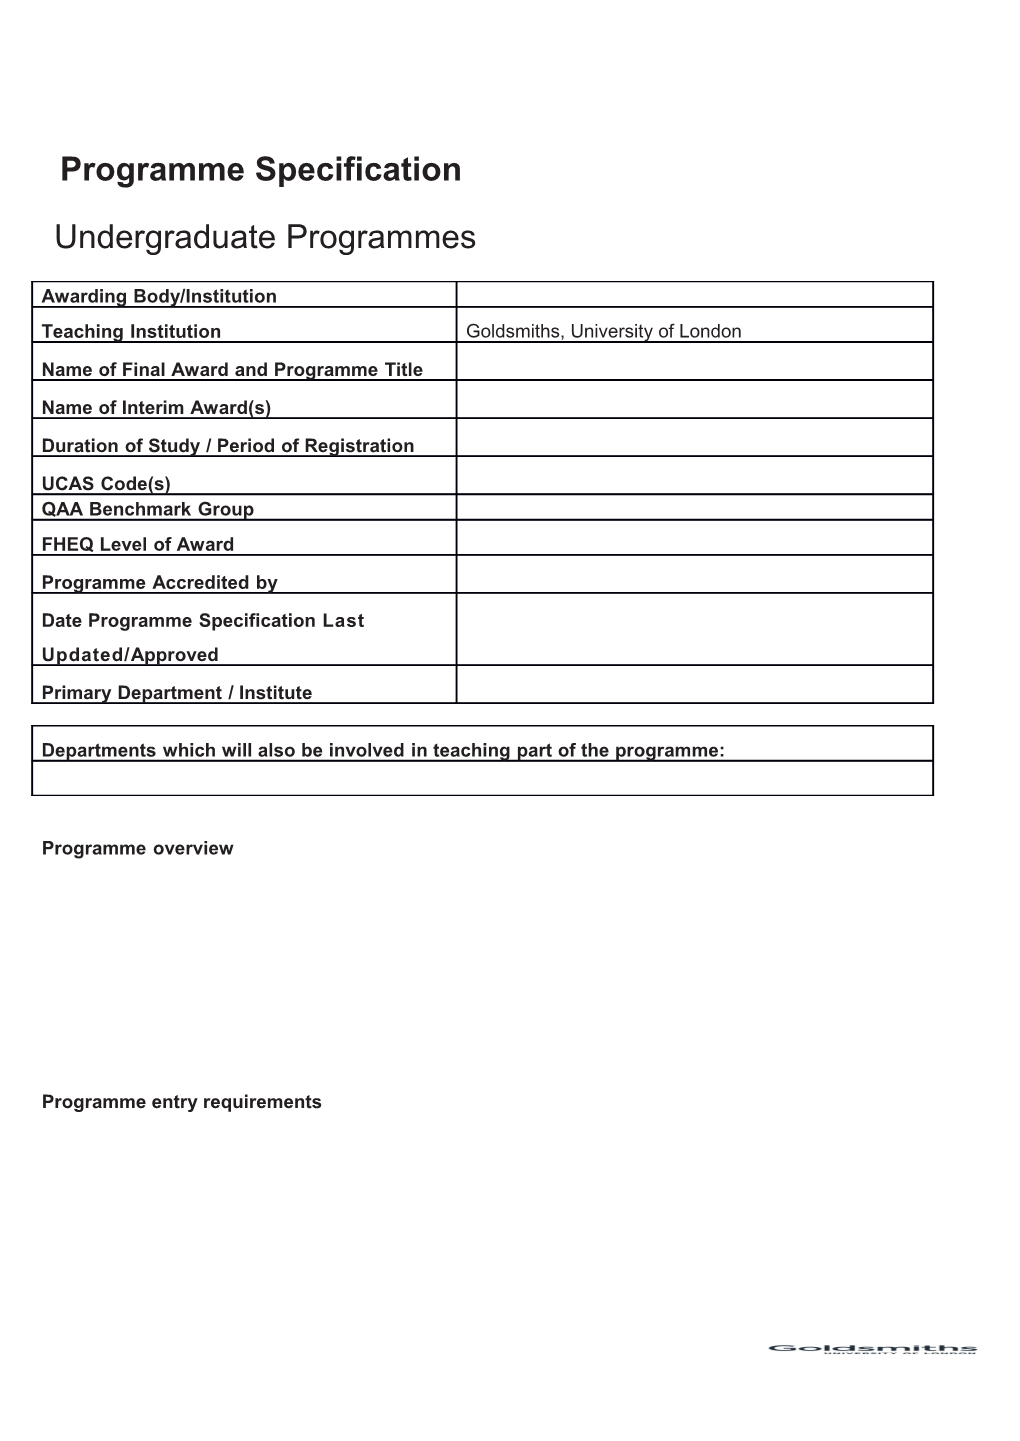 UG Programme Specification Template Two Interim Awards LASALLE.Pdf